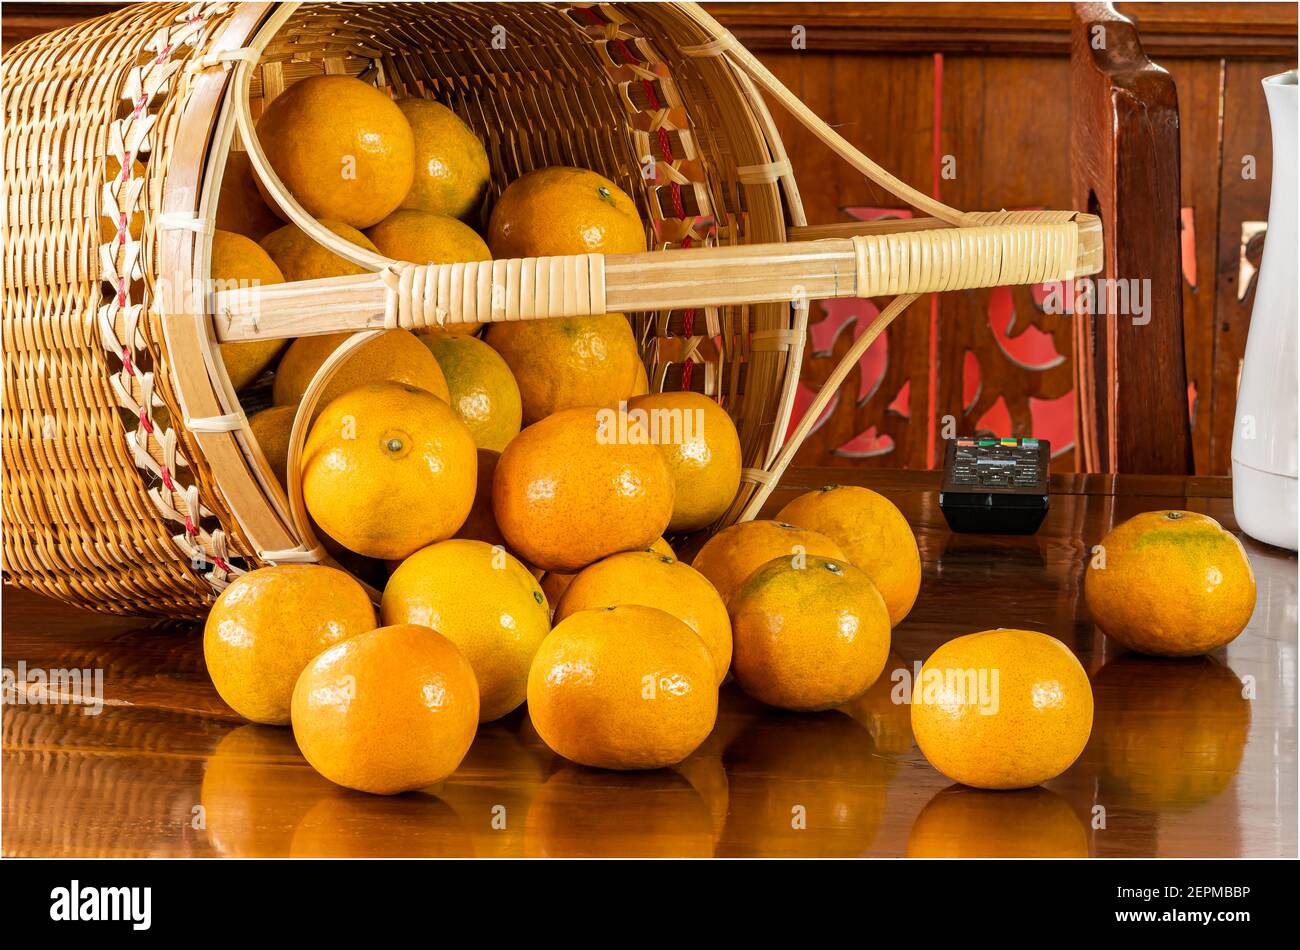 View of oranges in a bamboo basket on wooden table. Stock Photo